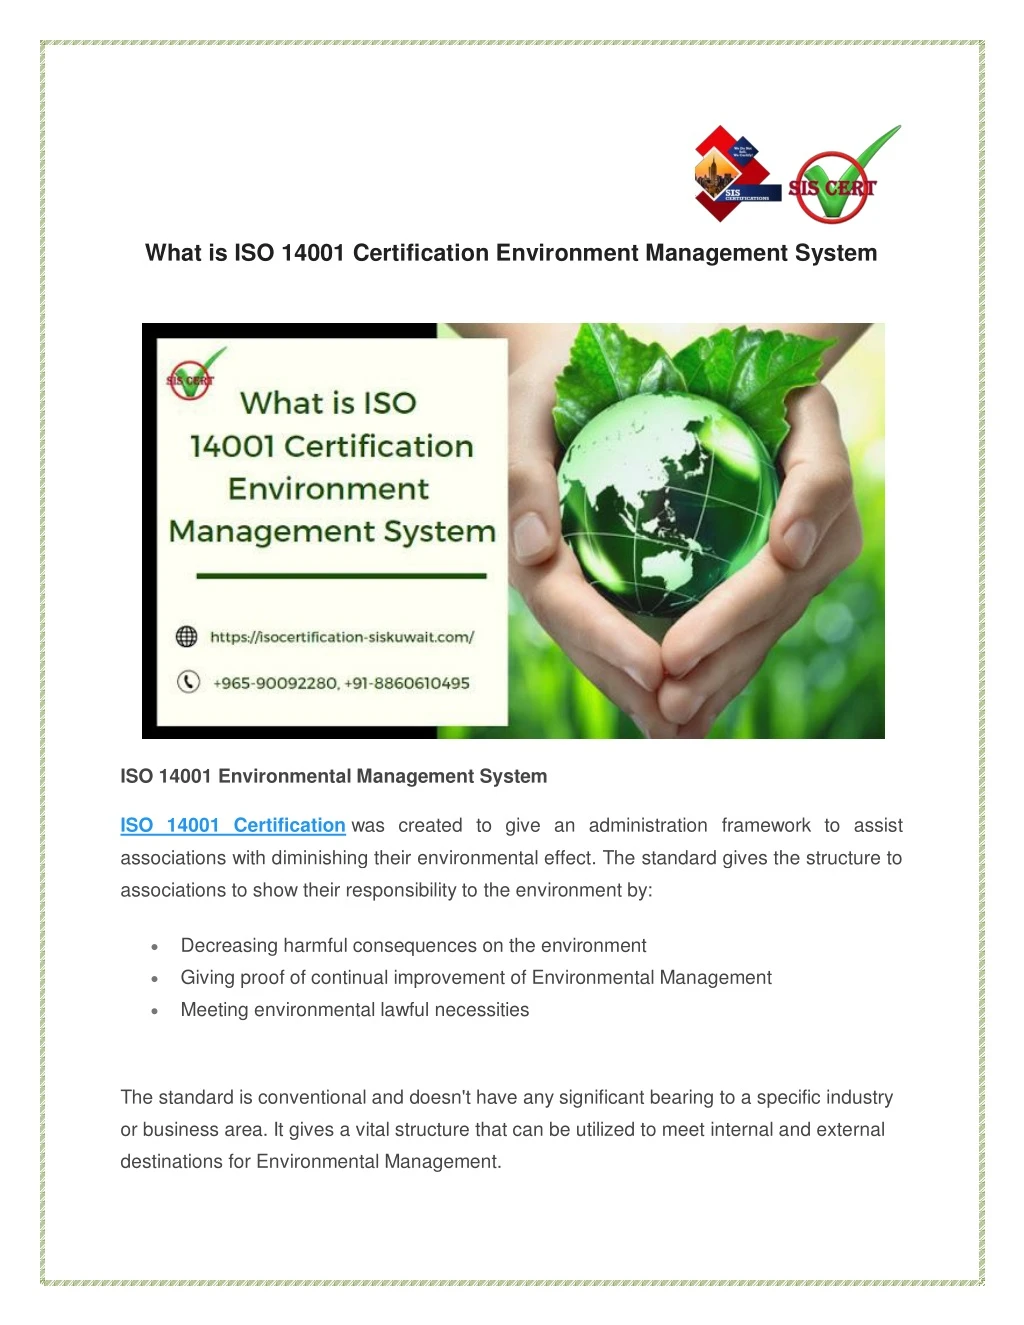 what is iso 14001 certification environment